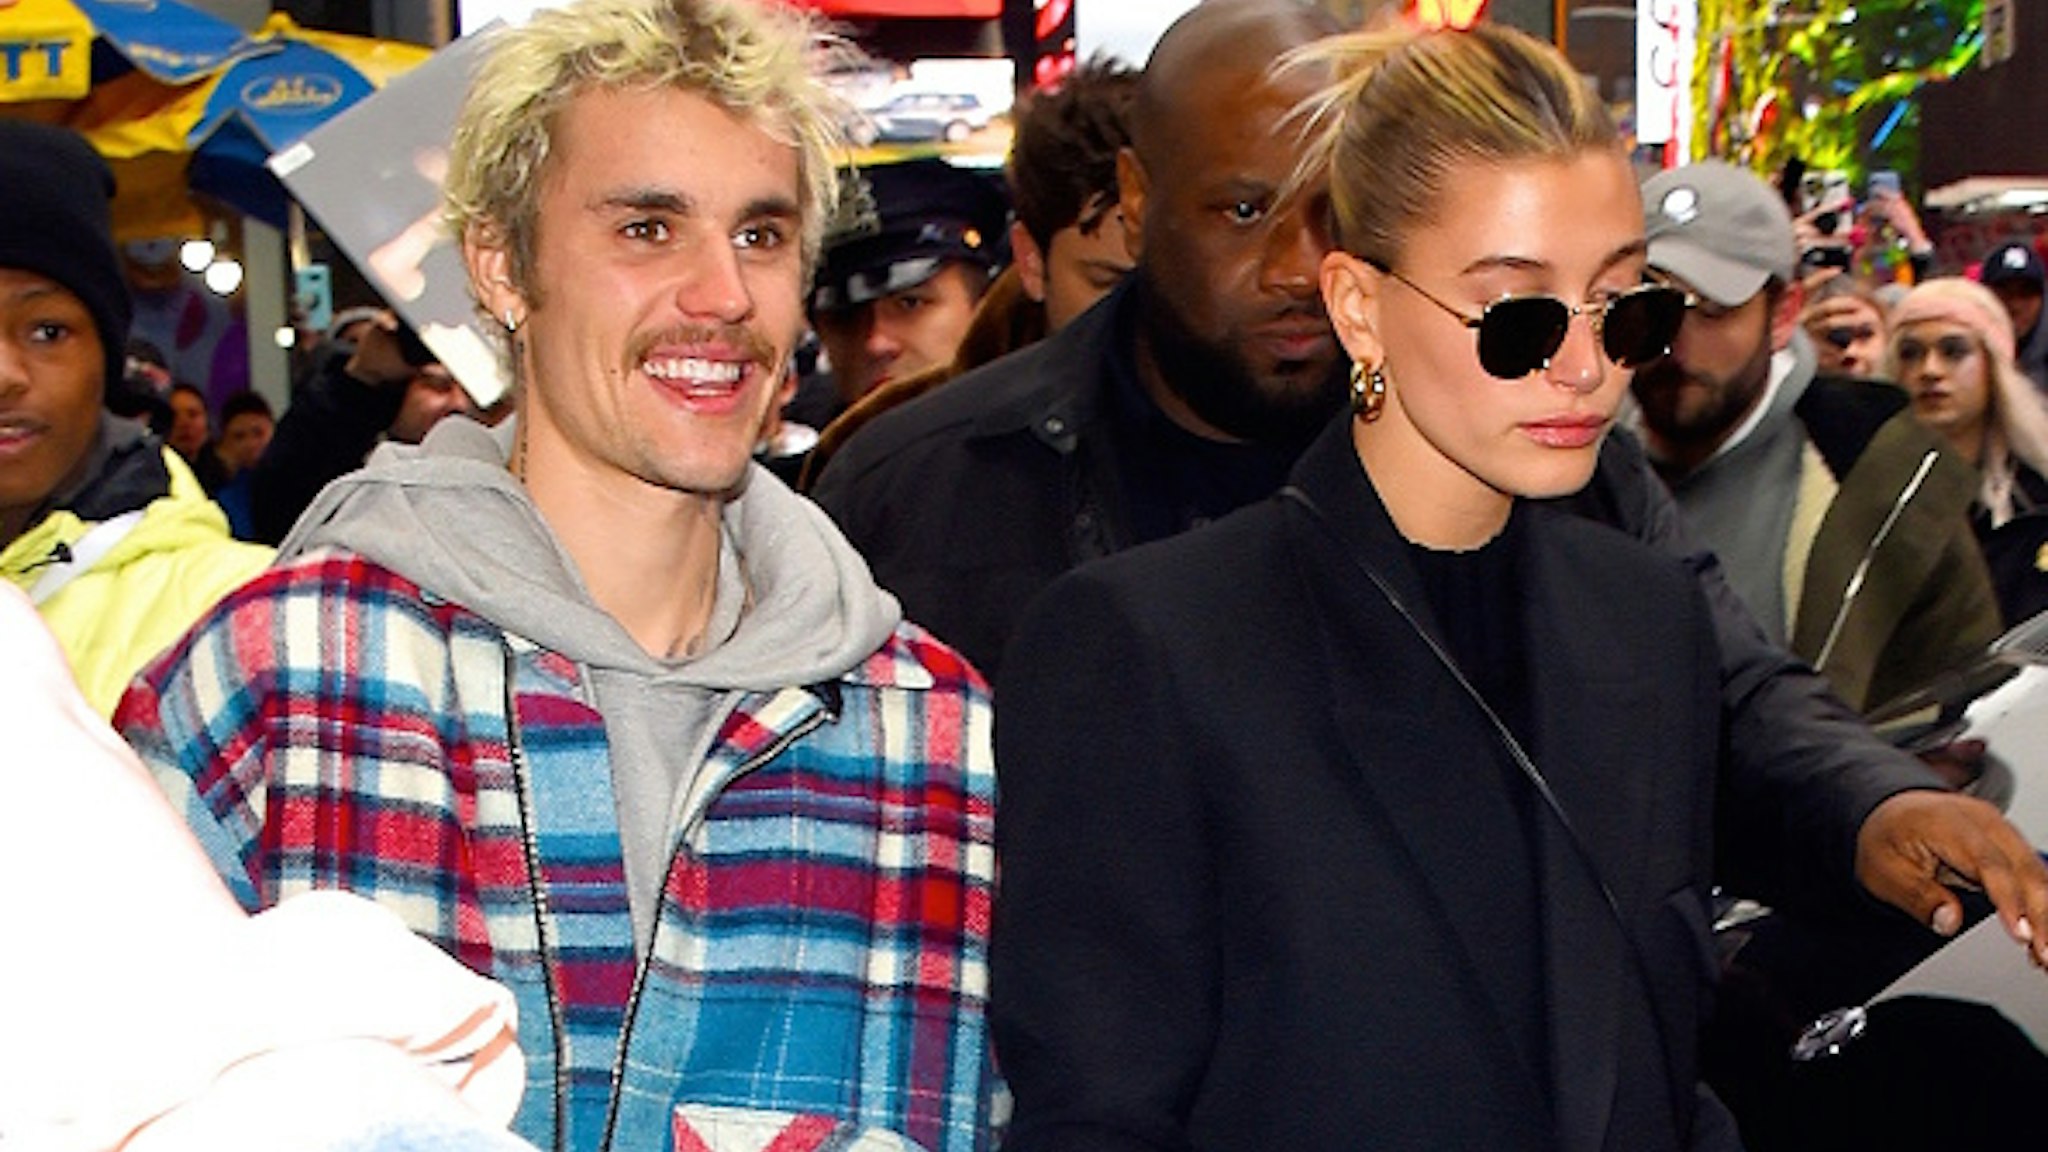 NEW YORK, NY - FEBRUARY 07: Justin Bieber and Hailey Bieber are seen in Times Square on February 7, 2020 in New York City.